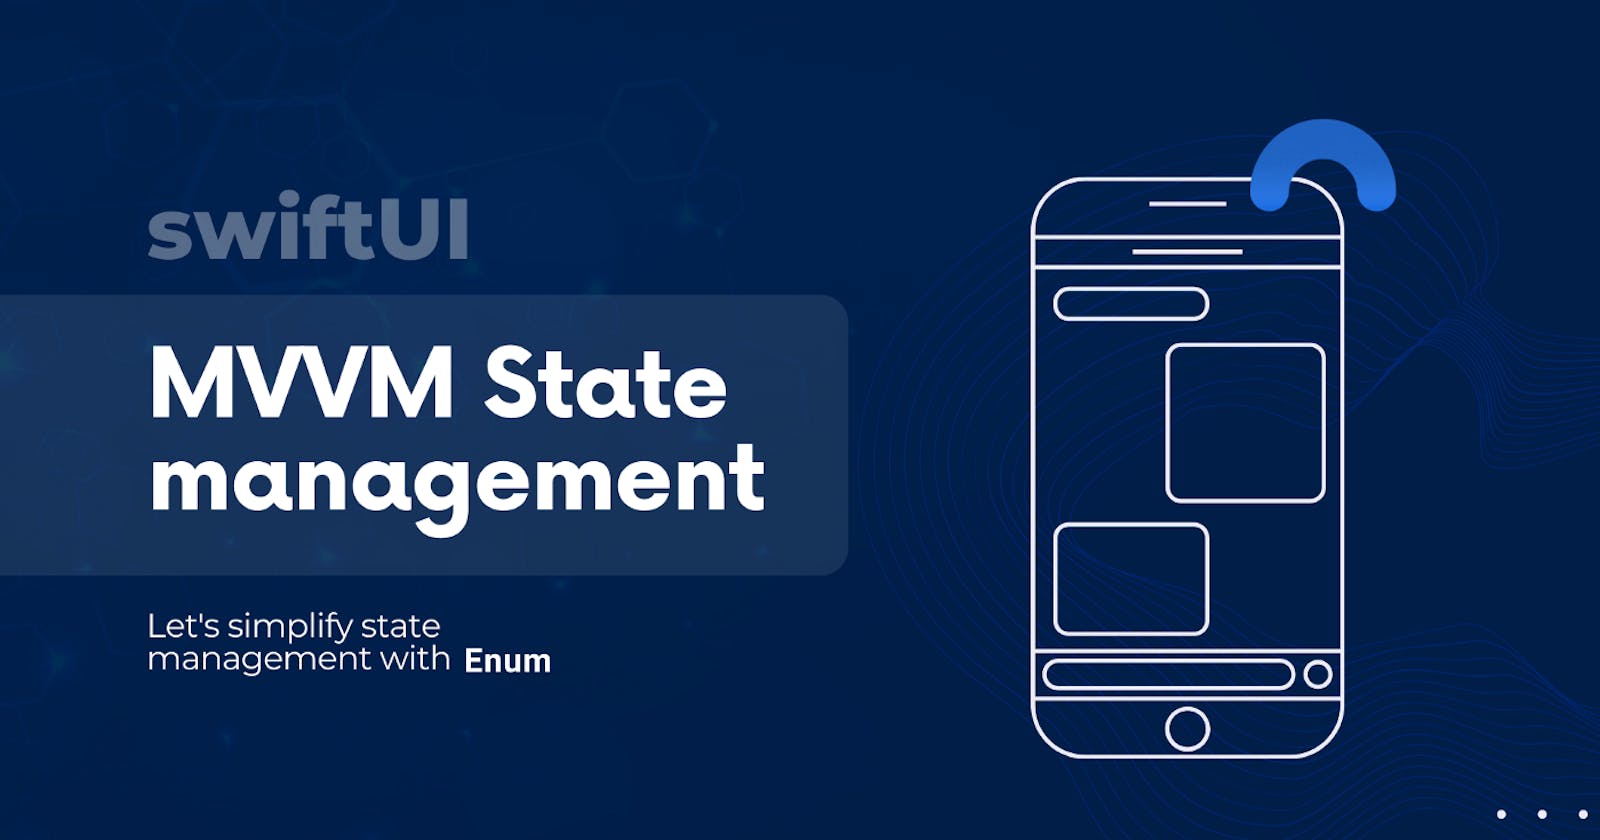 SwiftUI — MVVM State management in a simple way